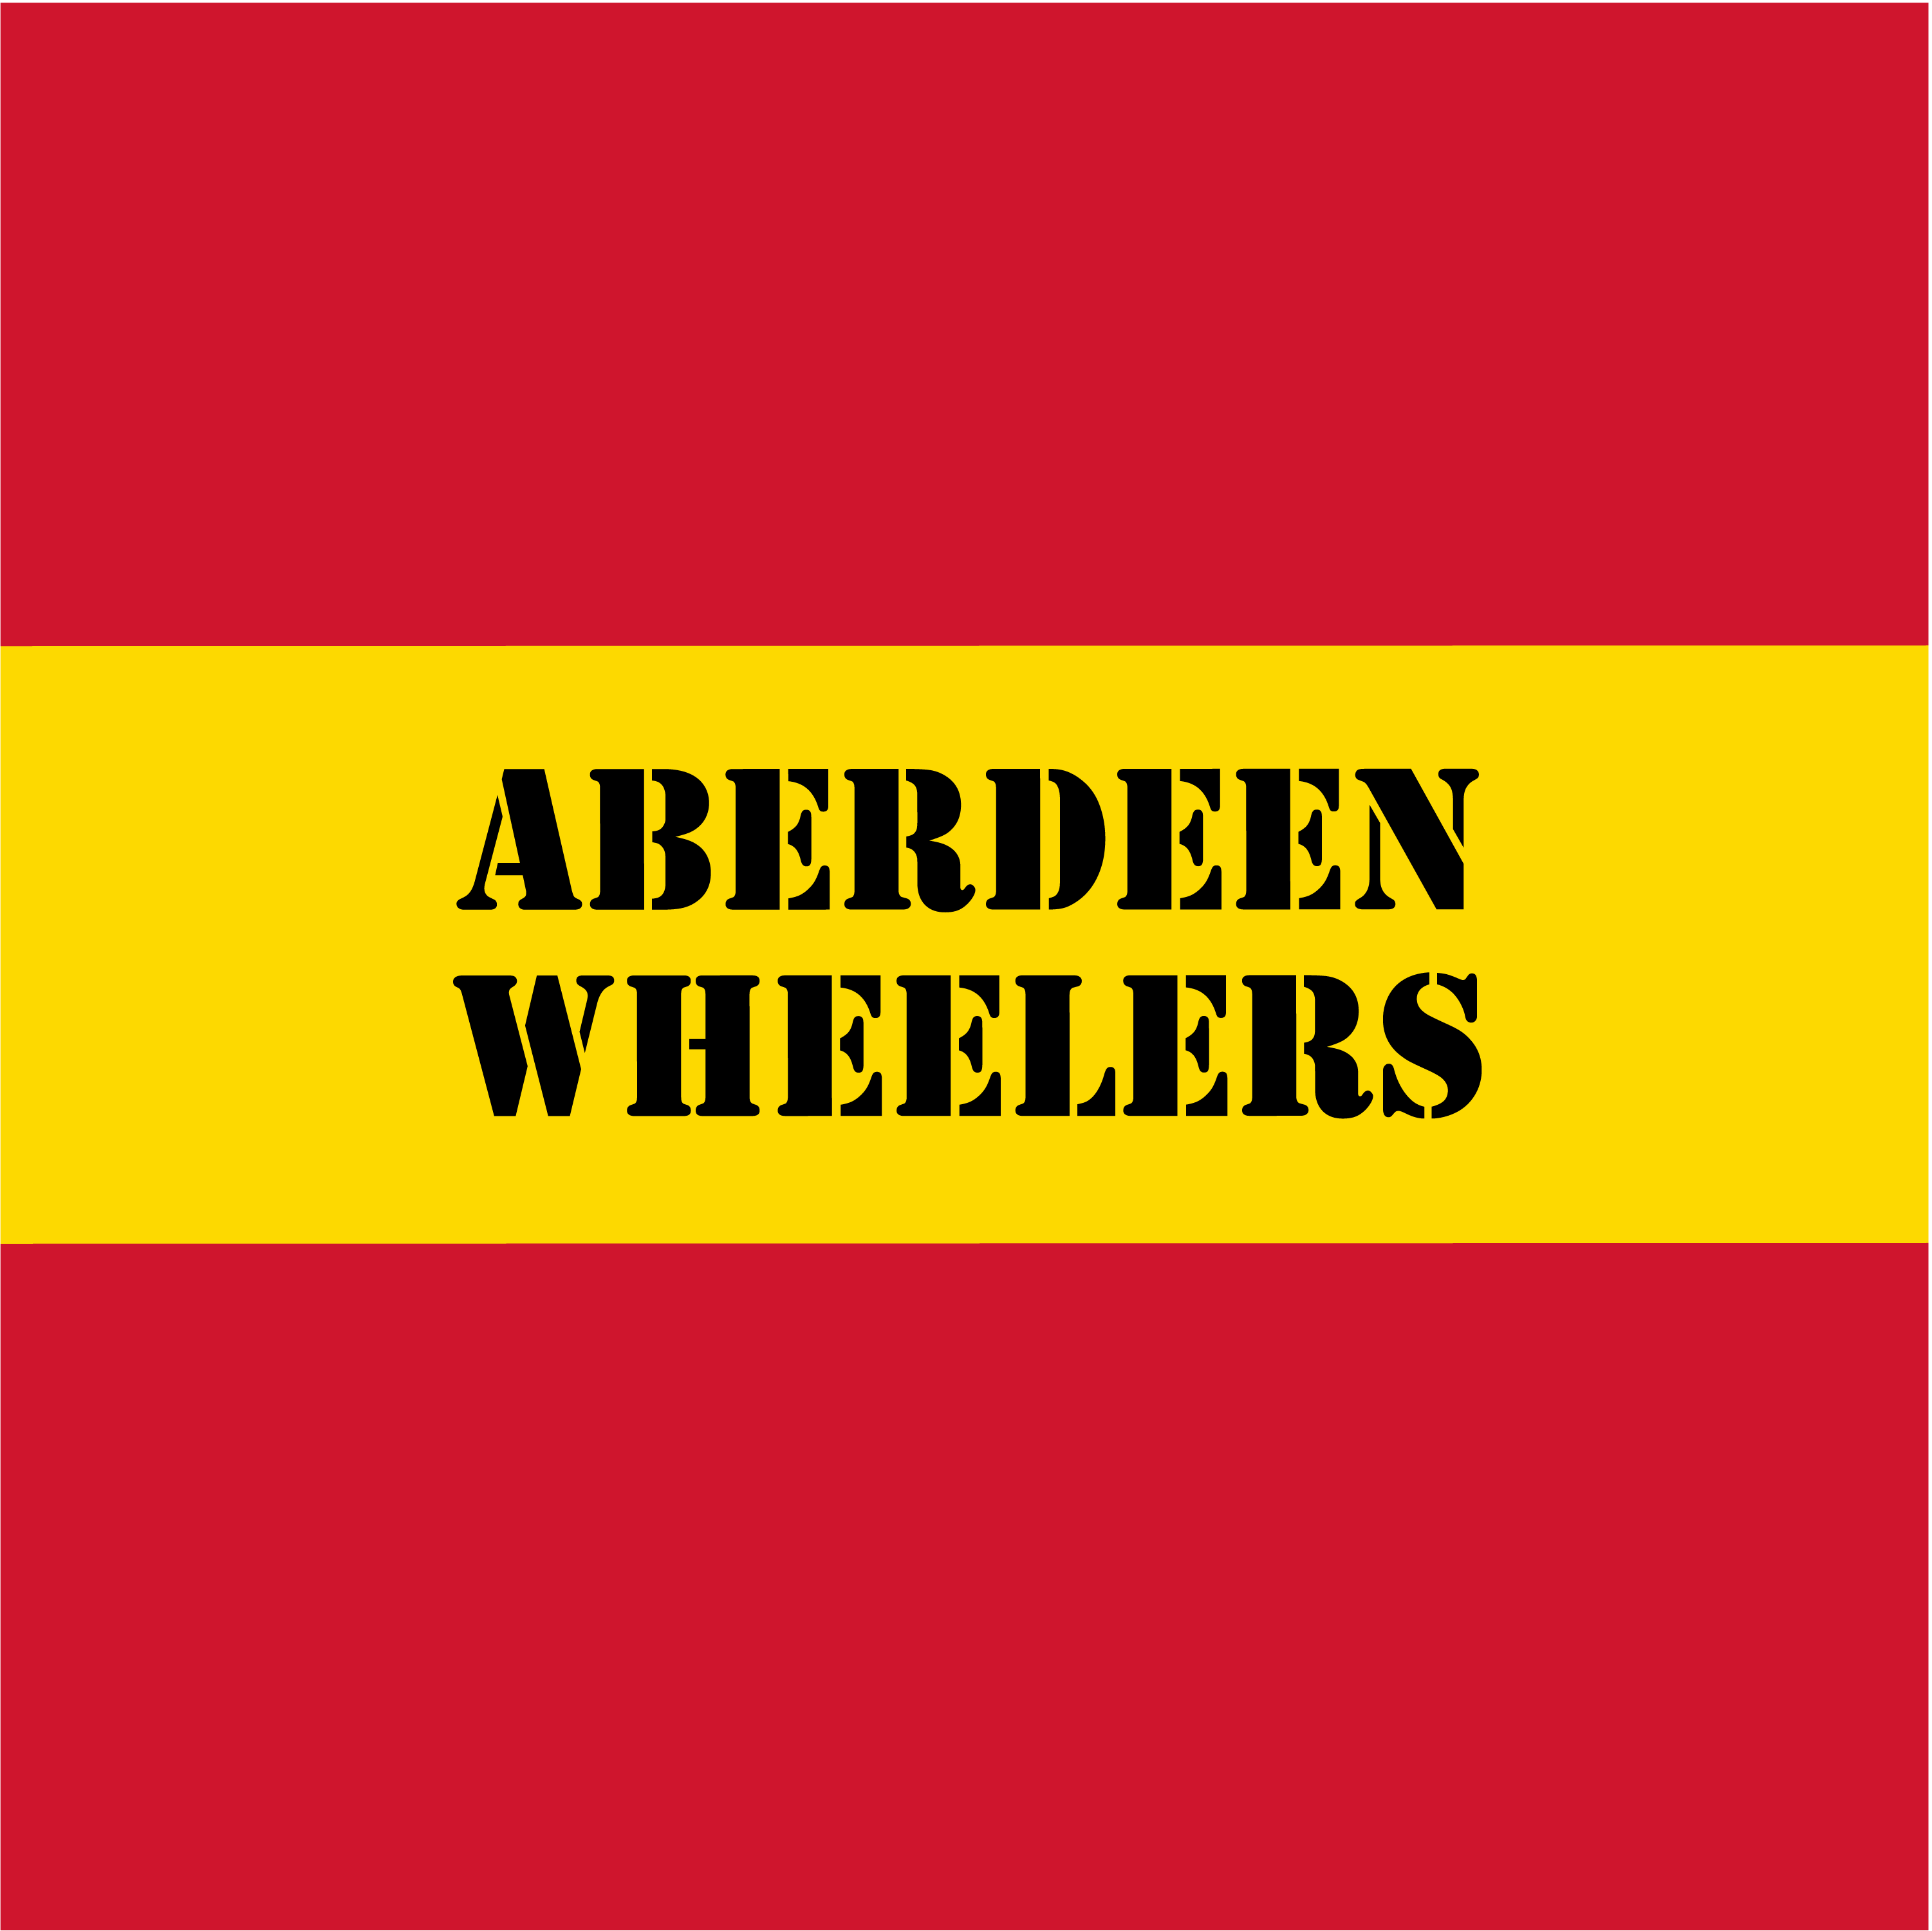 Club Image for ABERDEEN WHEELERS